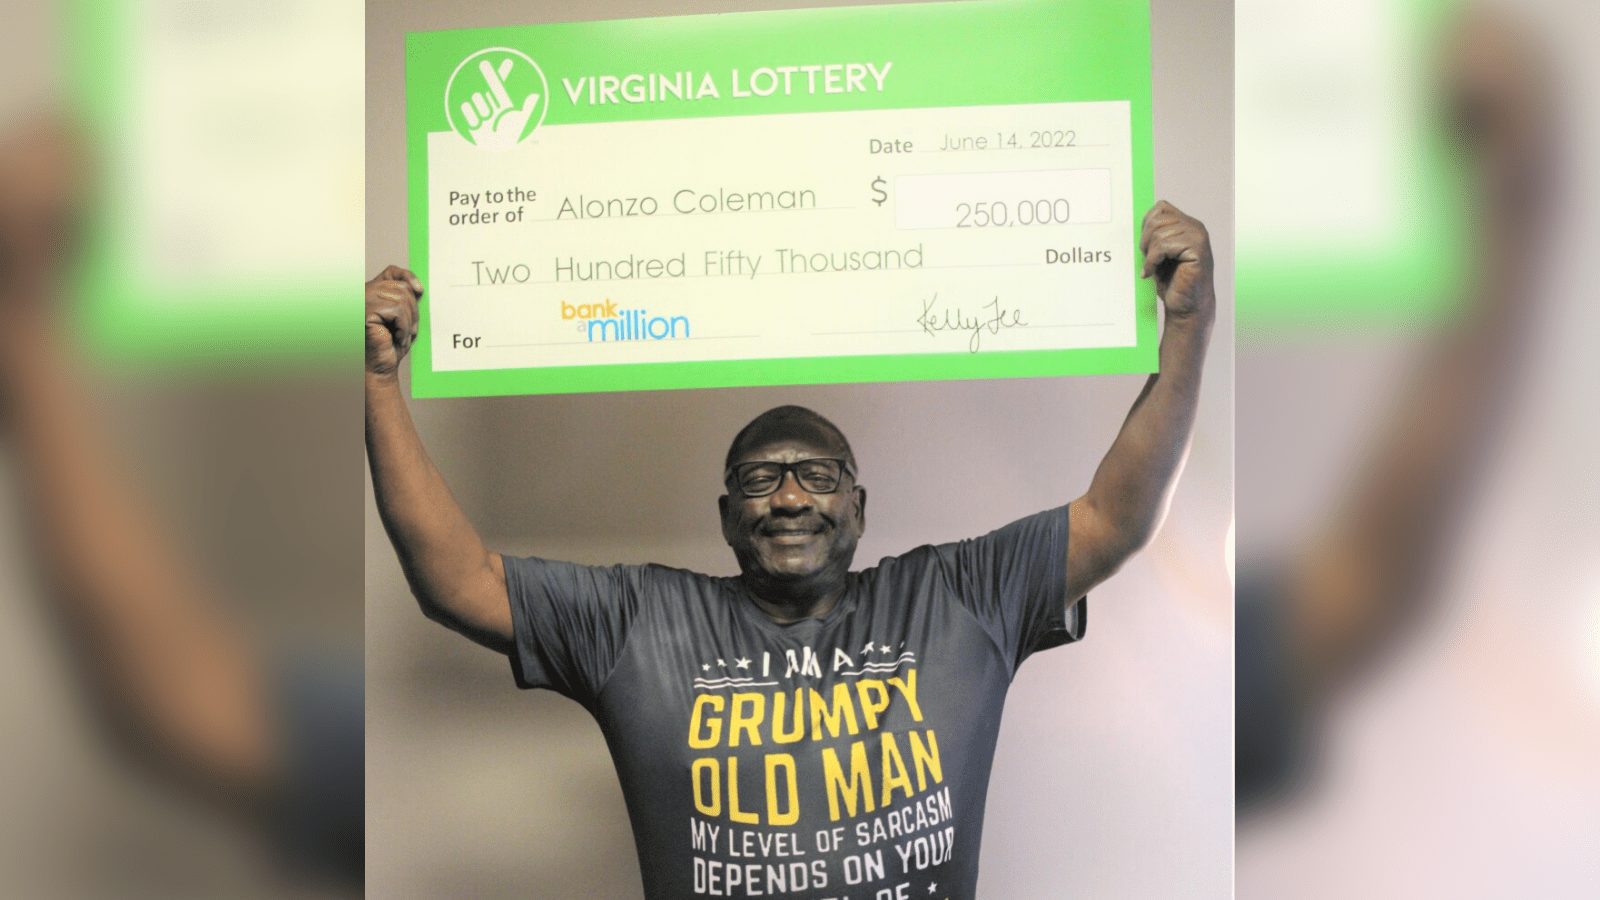 Man Wins $250,000 in Lottery After Dreaming the Numbers